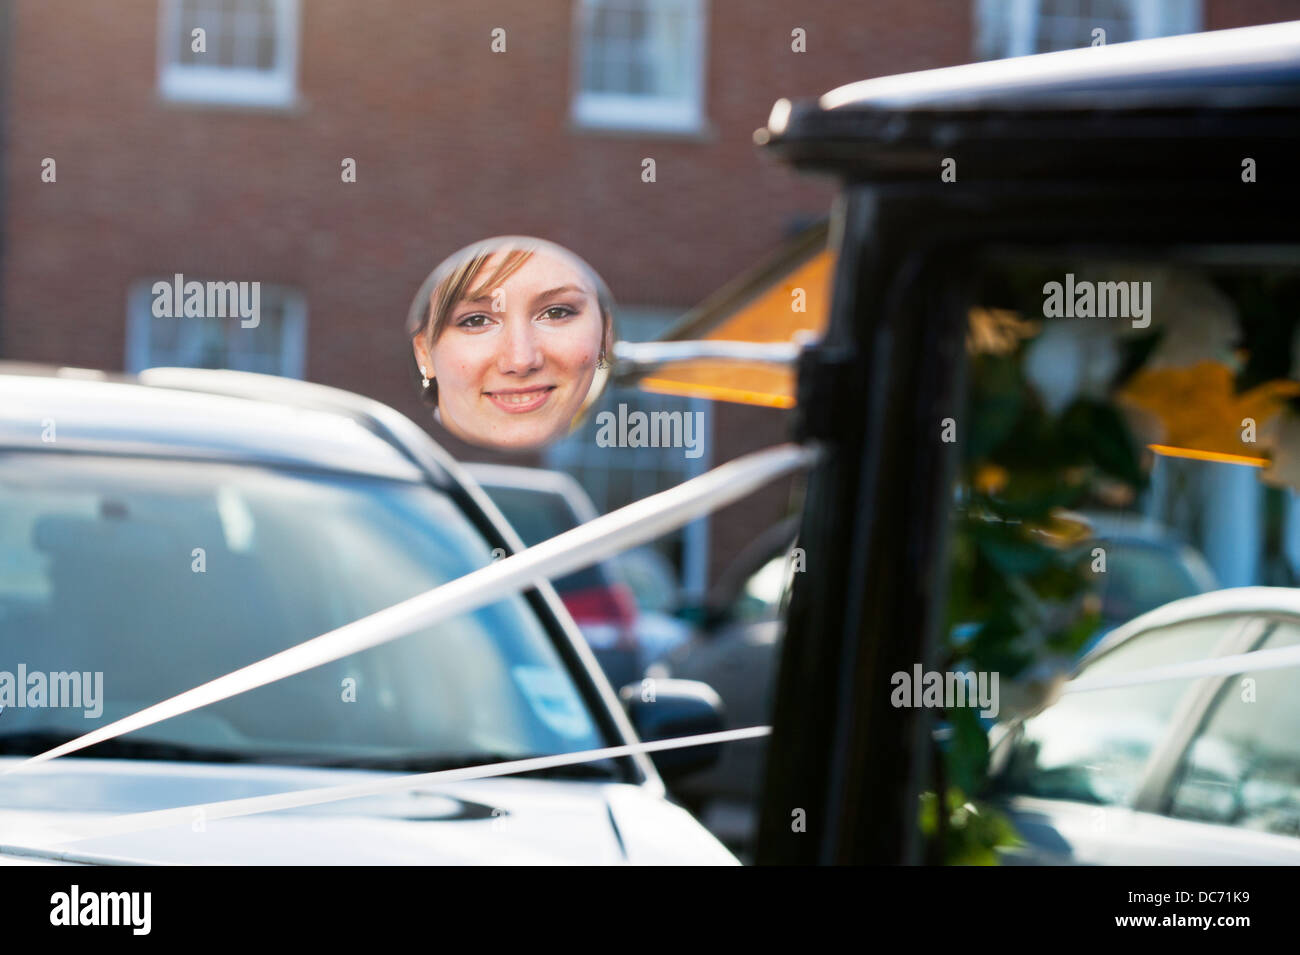 Brides face reflected in round car mirror on wedding day lady smiling reflection Stock Photo